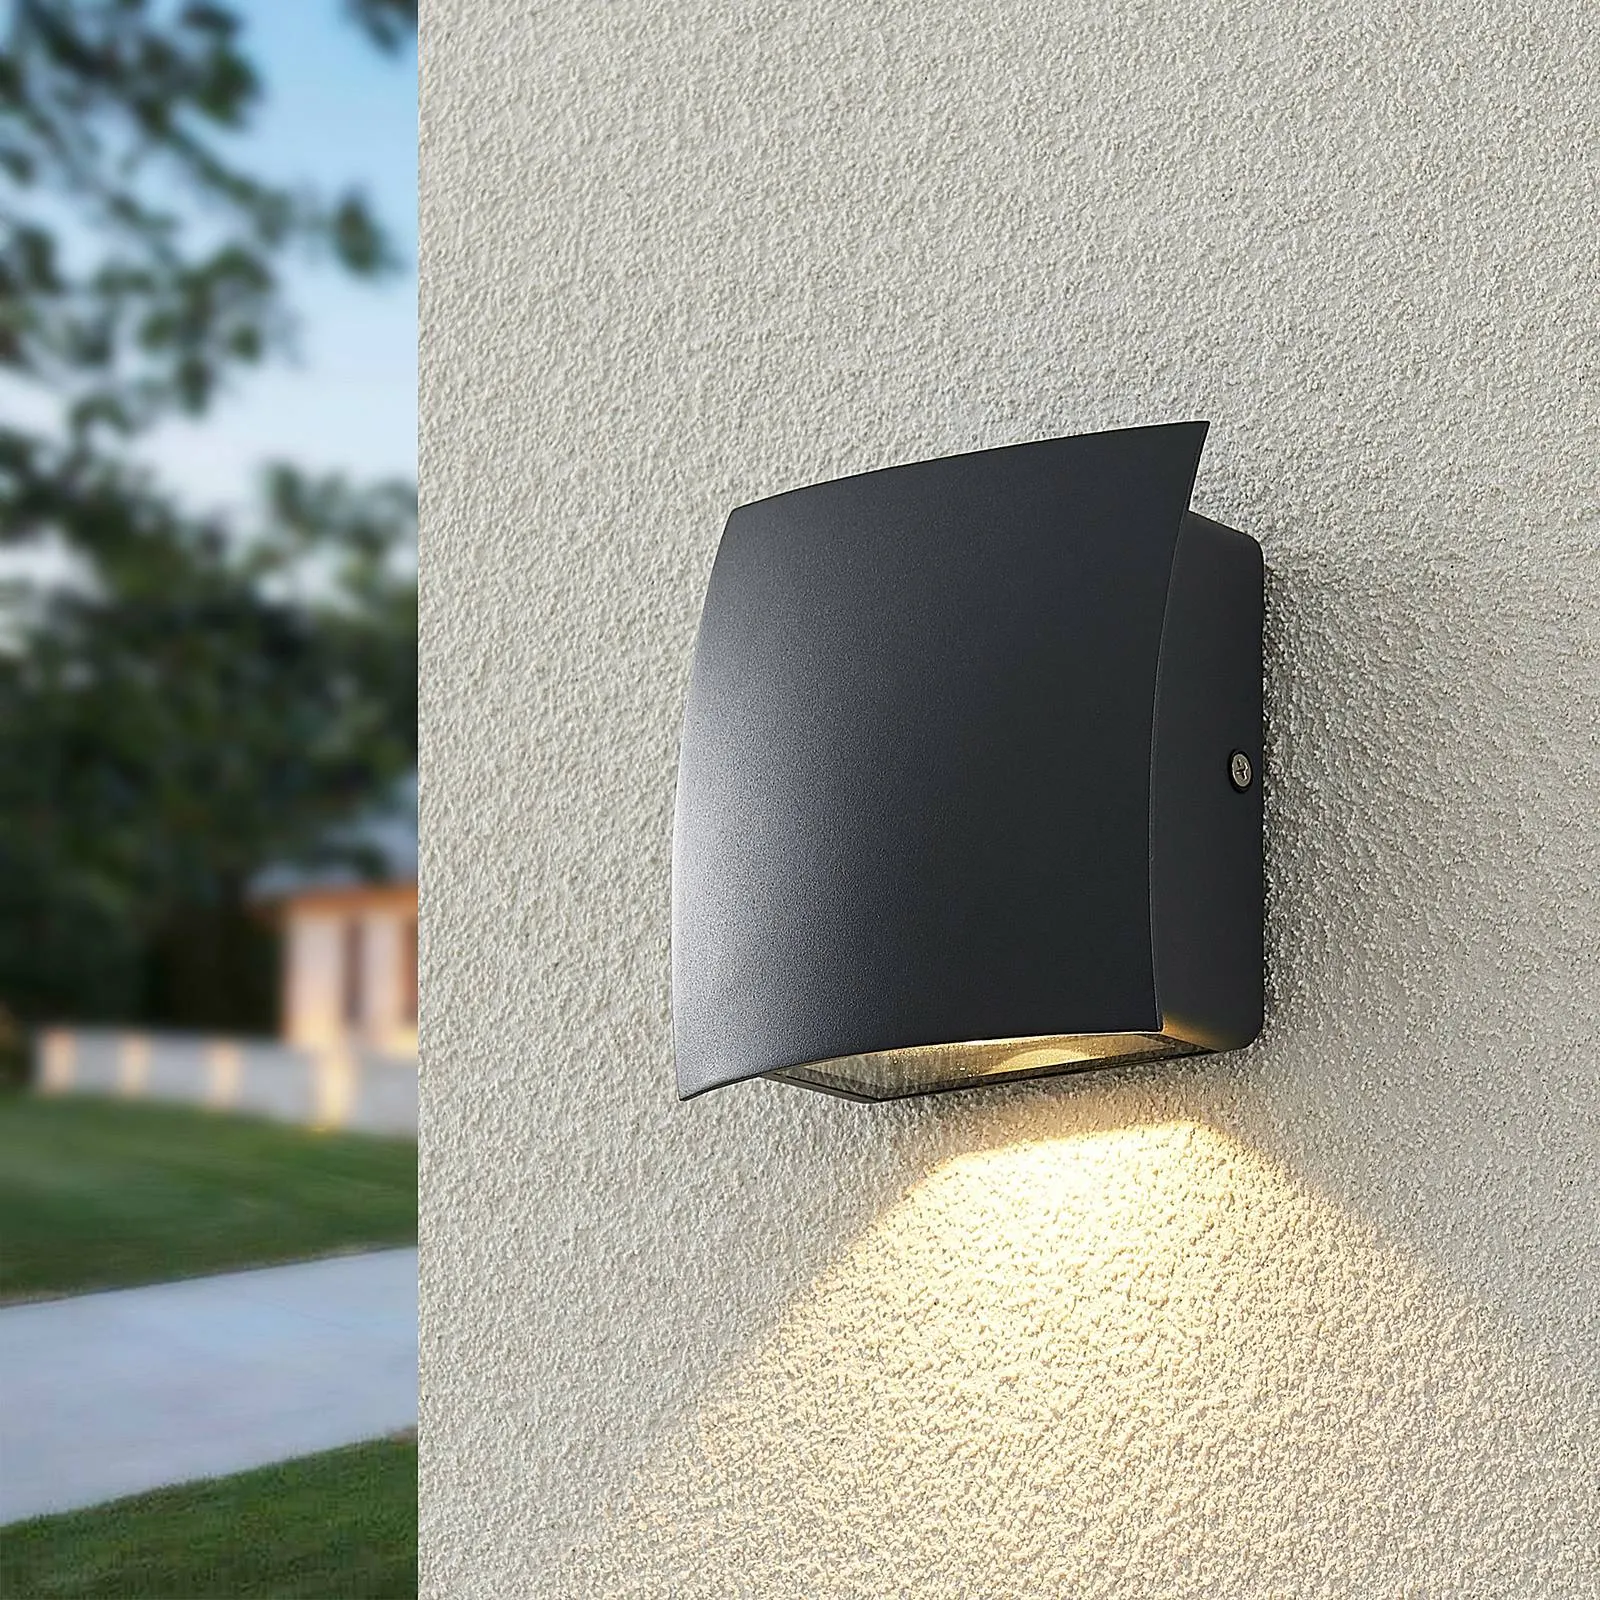 ELC Mircalio LED outdoor wall lamp